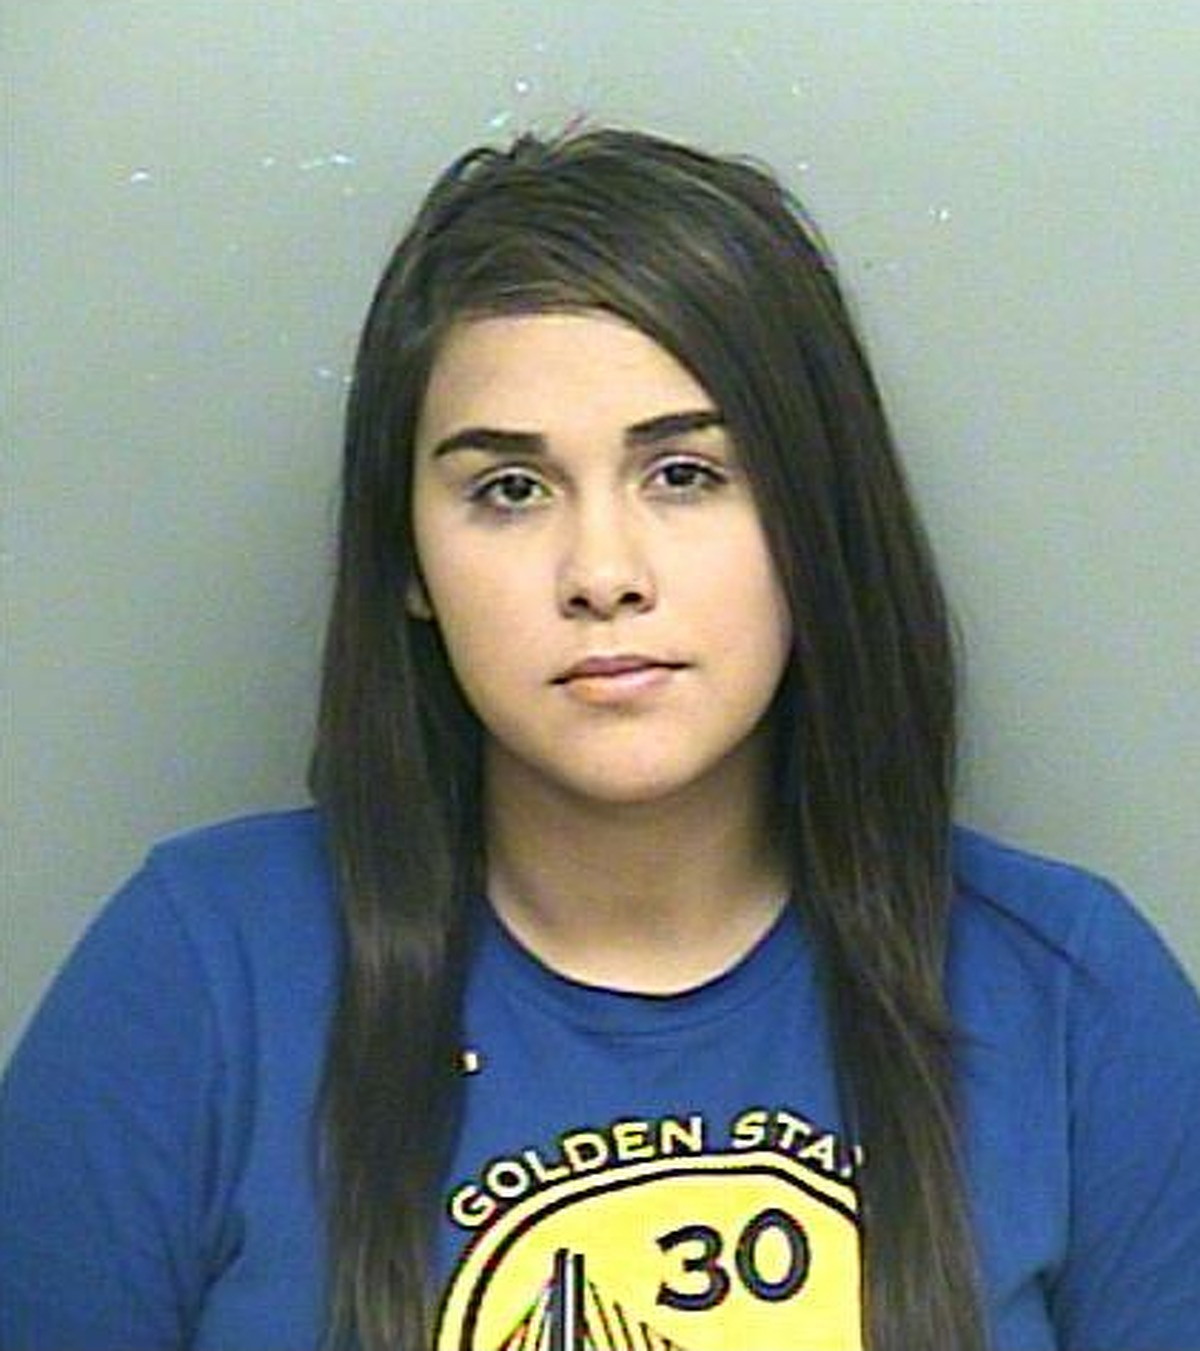 Alexandria Vera , a former Aldine ISD middle school teacher in Houston pleaded guilty to having a long-term sexual relationship with a student. Vera, 24, accepted a charge of aggravated sexual assault of a child and on Jan. 13, 2017, was sentenced to 10 years in prison. The charge carries a maximum sentence of life in prison. She became pregnant during the relationship but terminated the pregnancy after Child Protective Services visited the school and questioned the pair about their relationship.